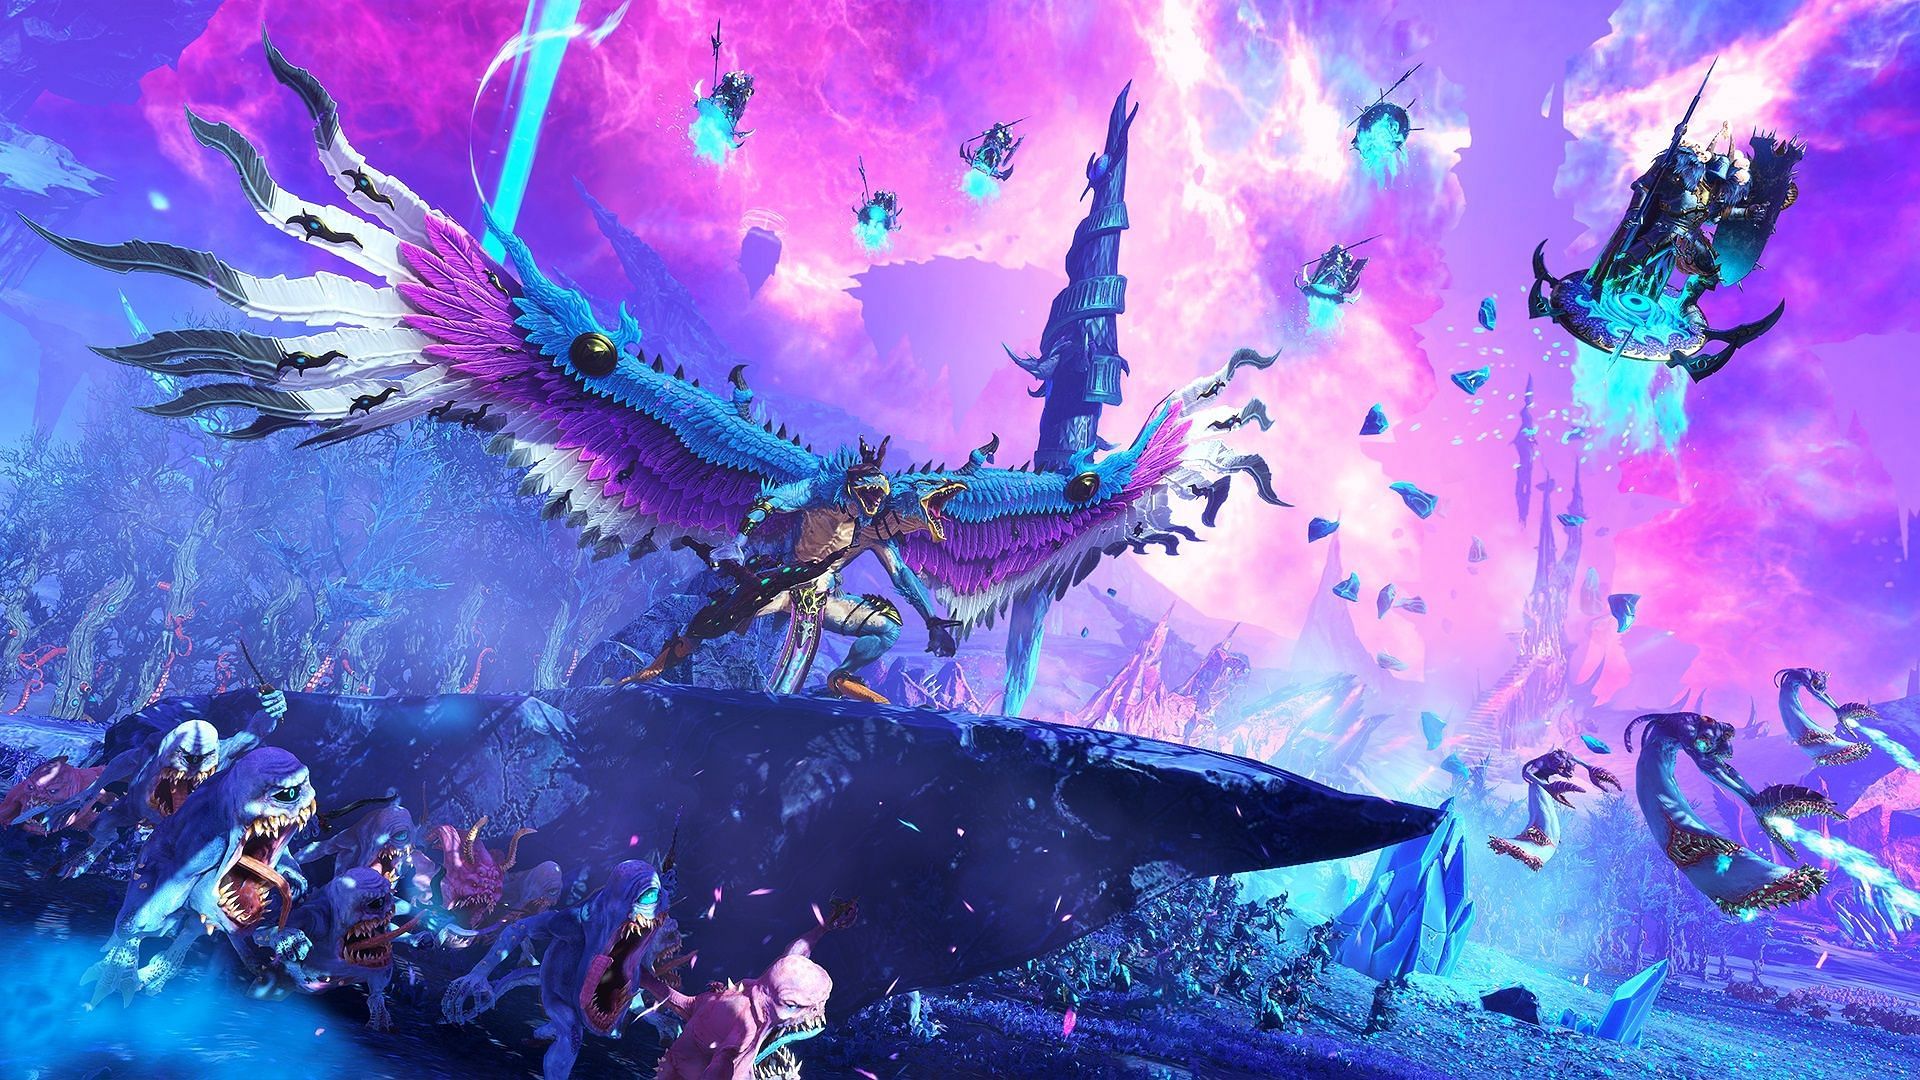 Powerful deceptive magics will destroy the enemy with Tzeentch in Total War: Warhammer 3 (Image via Creative Assembly)